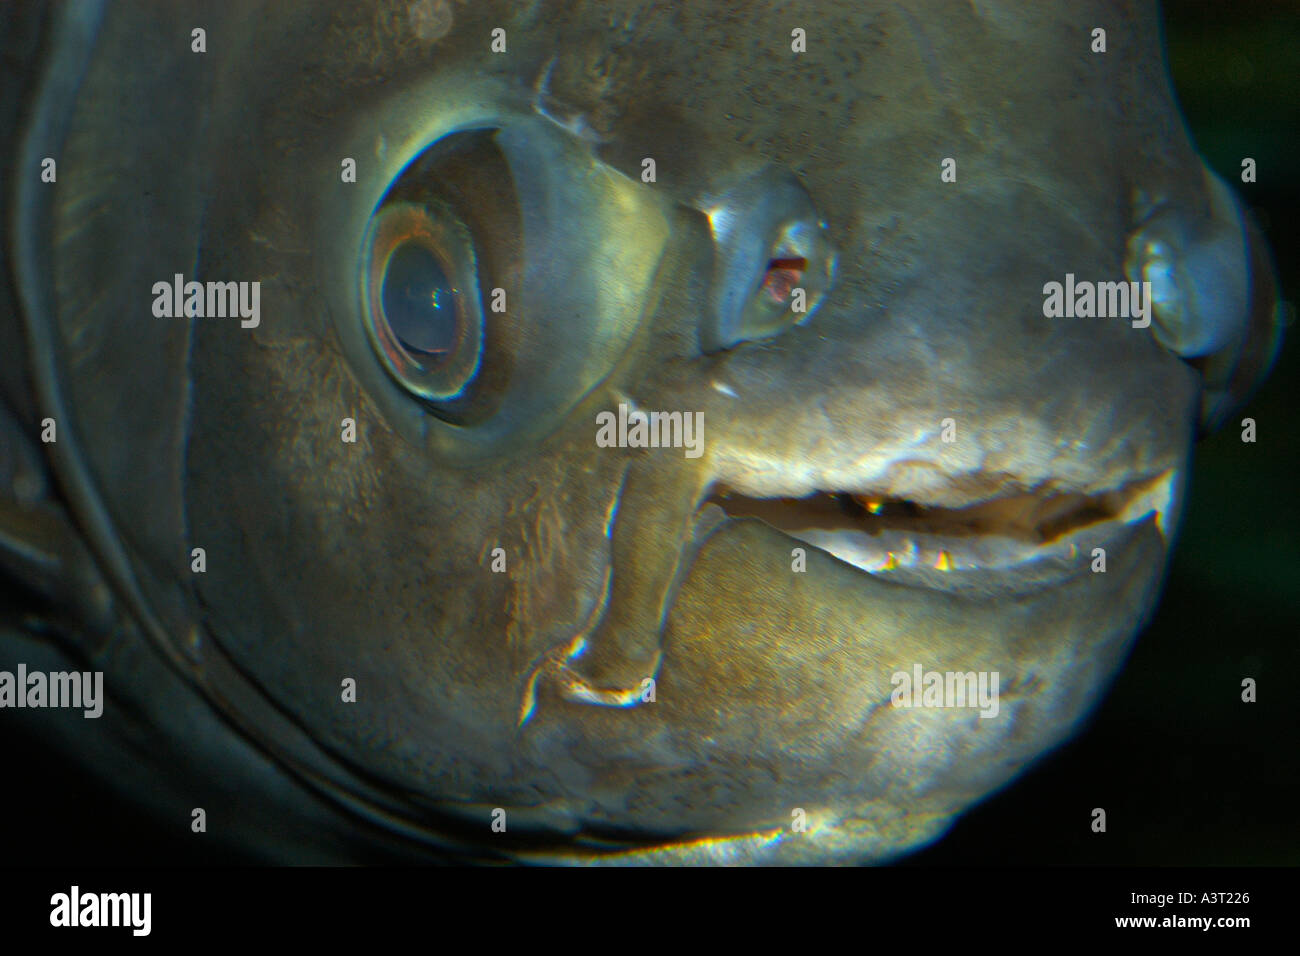 Pacu face detail Piaractus mesopotamicus this species of freshwater characin naturally occurs in Brazil Stock Photo